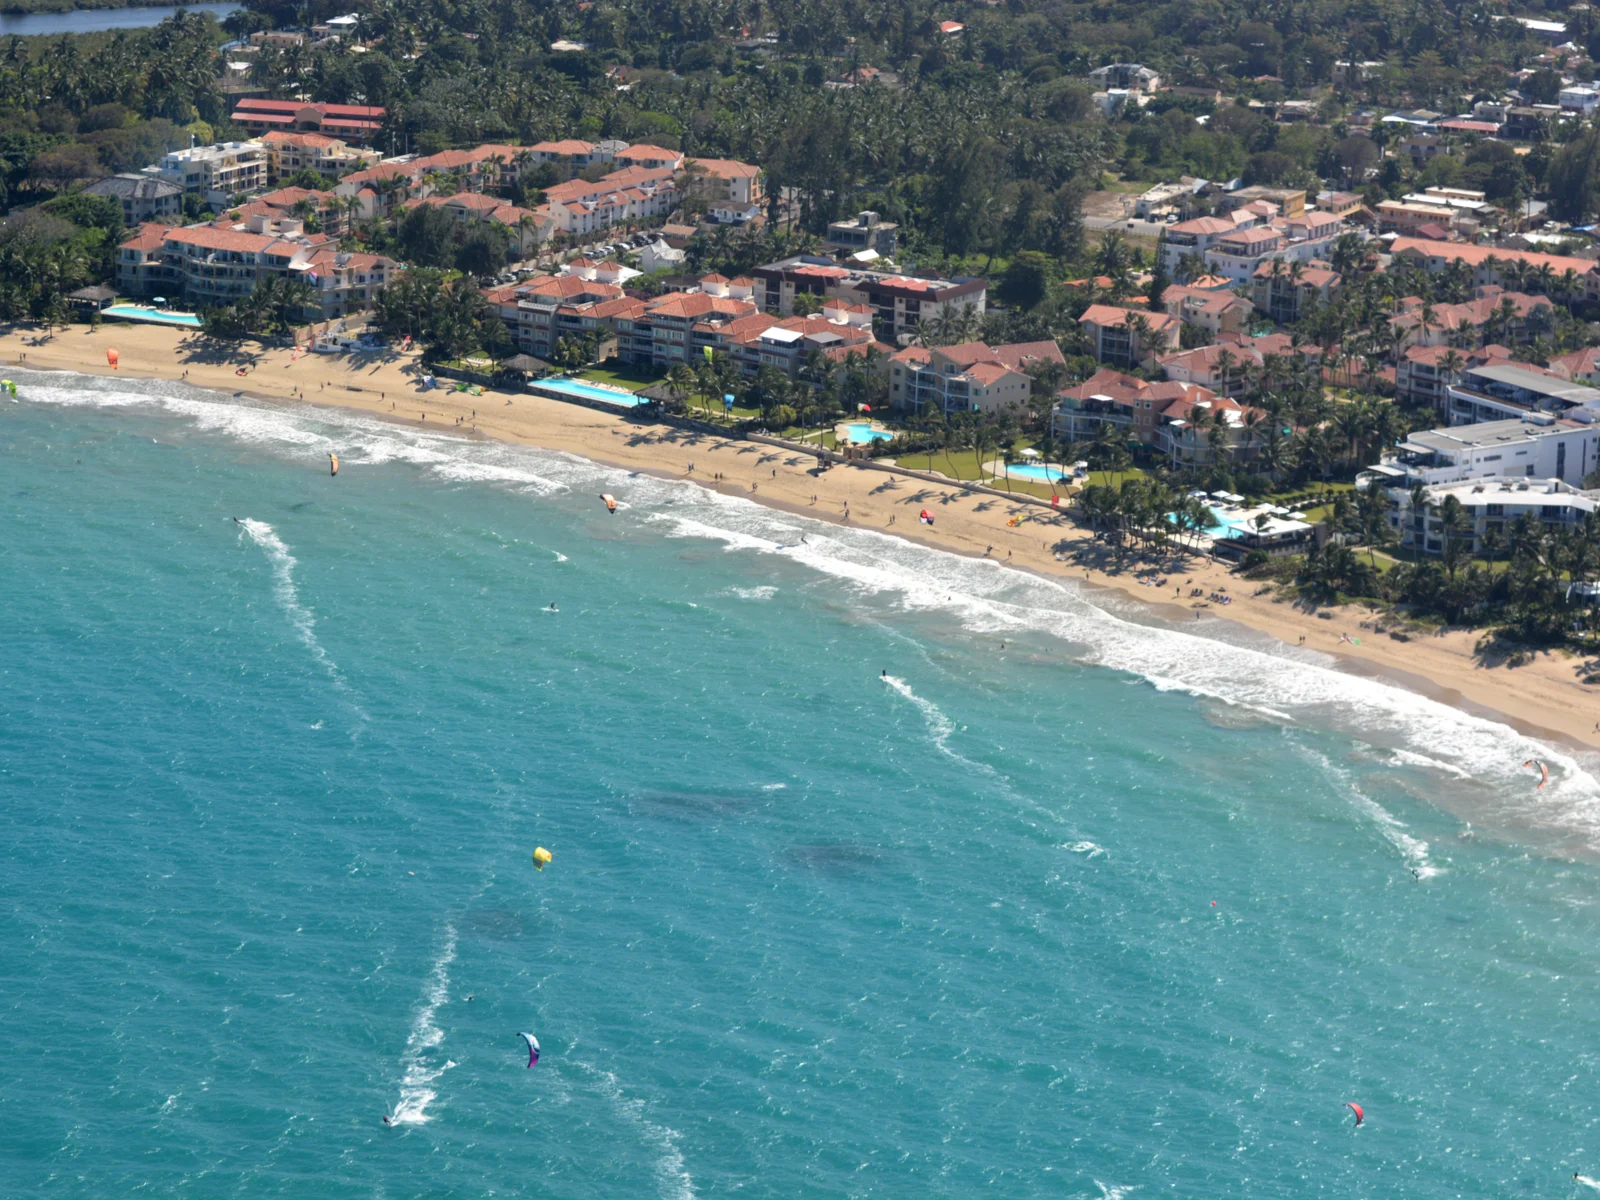 Aerial view of kite surfers riding the waves ad wind at Kite Beach in Cabarete, one of the best beaches in the Dominican Republic, with some people on the beach and hotels offshore 